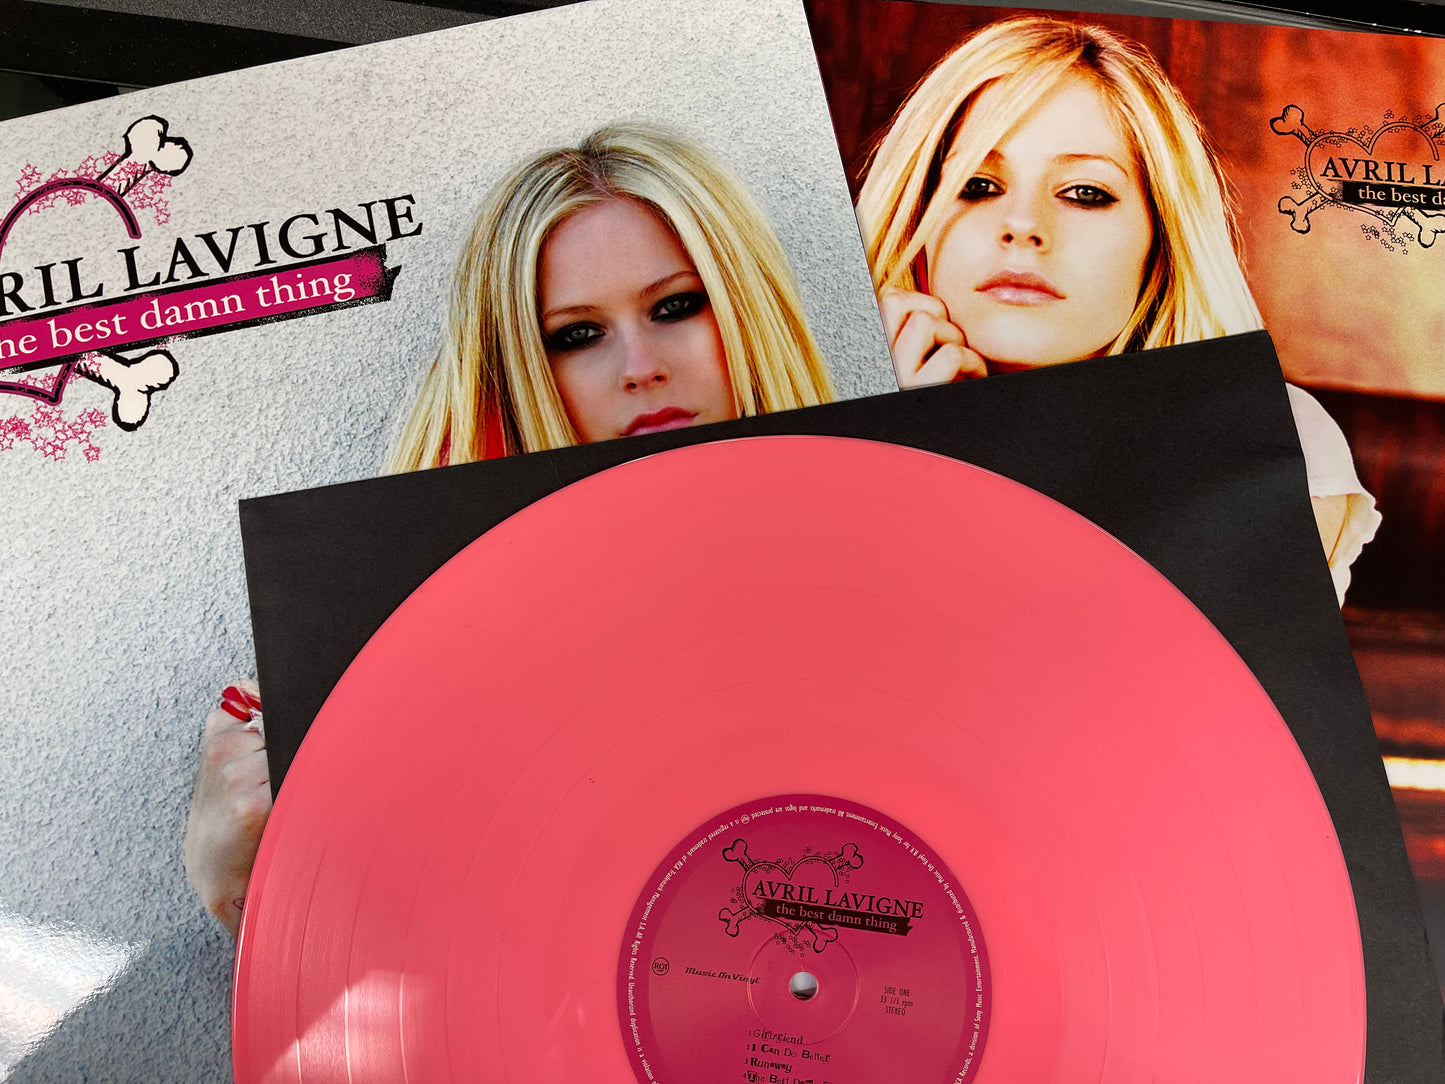 Avril Lavigne - The Best Damn Thing (2017, EU Music On Vinyl Pressing, Hot Pink, Numbered)